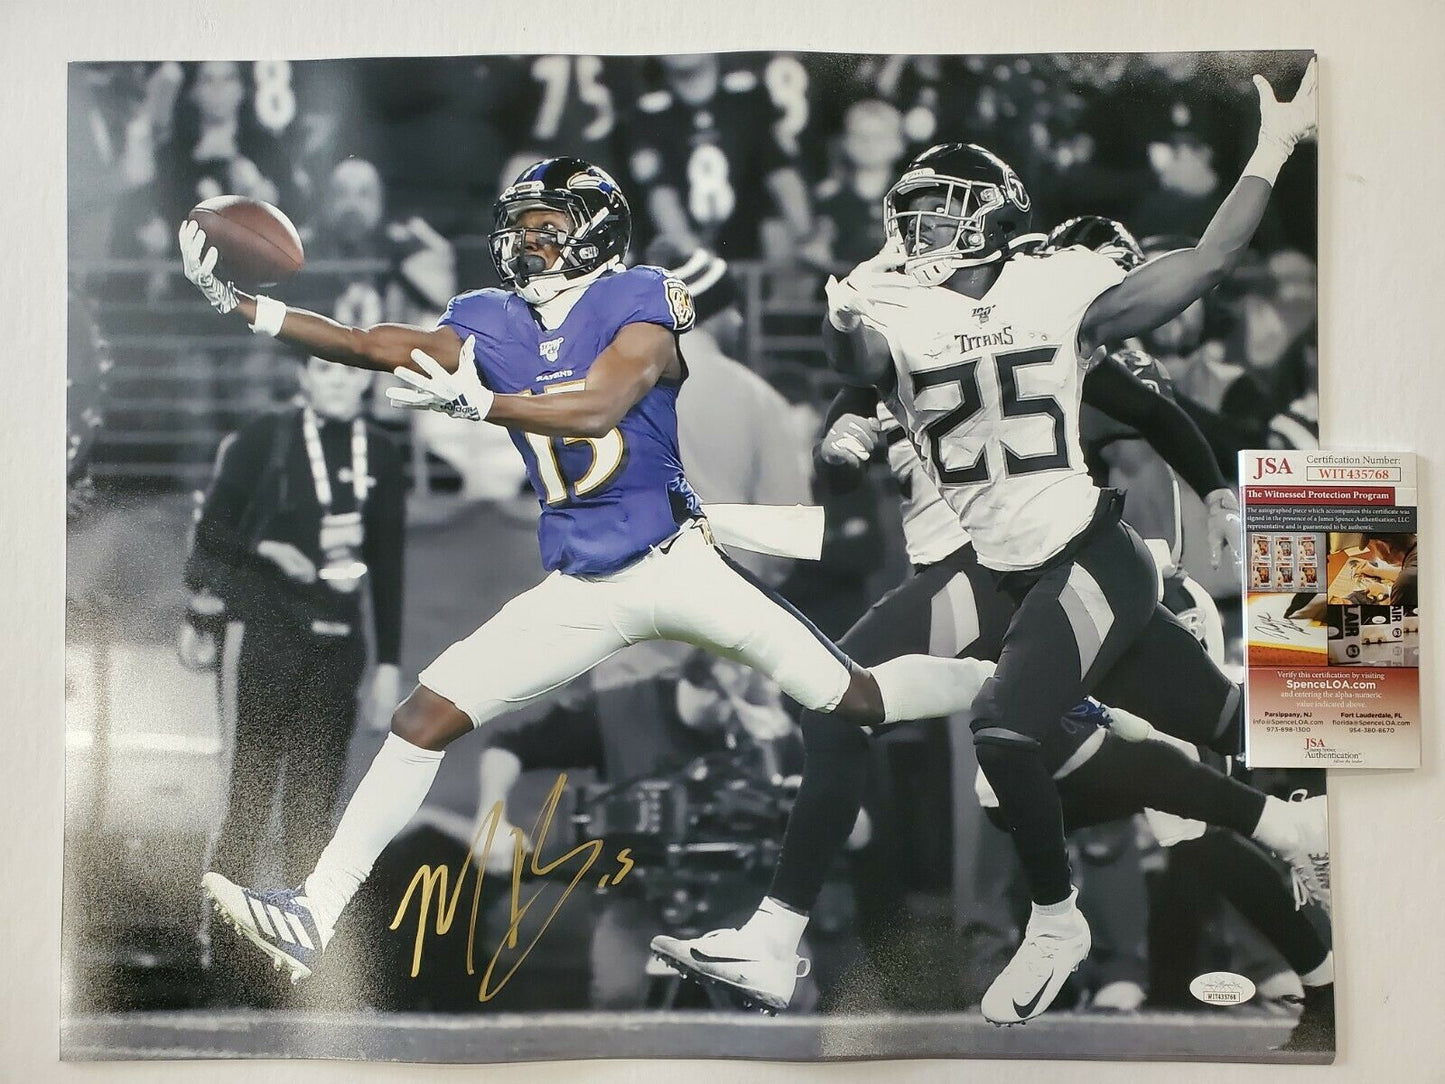 MVP Authentics BALTIMORE RAVENS MARQUISE BROWN AUTOGRAPHED SIGNED 16x20 PHOTO JSA  COA 89.10 sports jersey framing , jersey framing